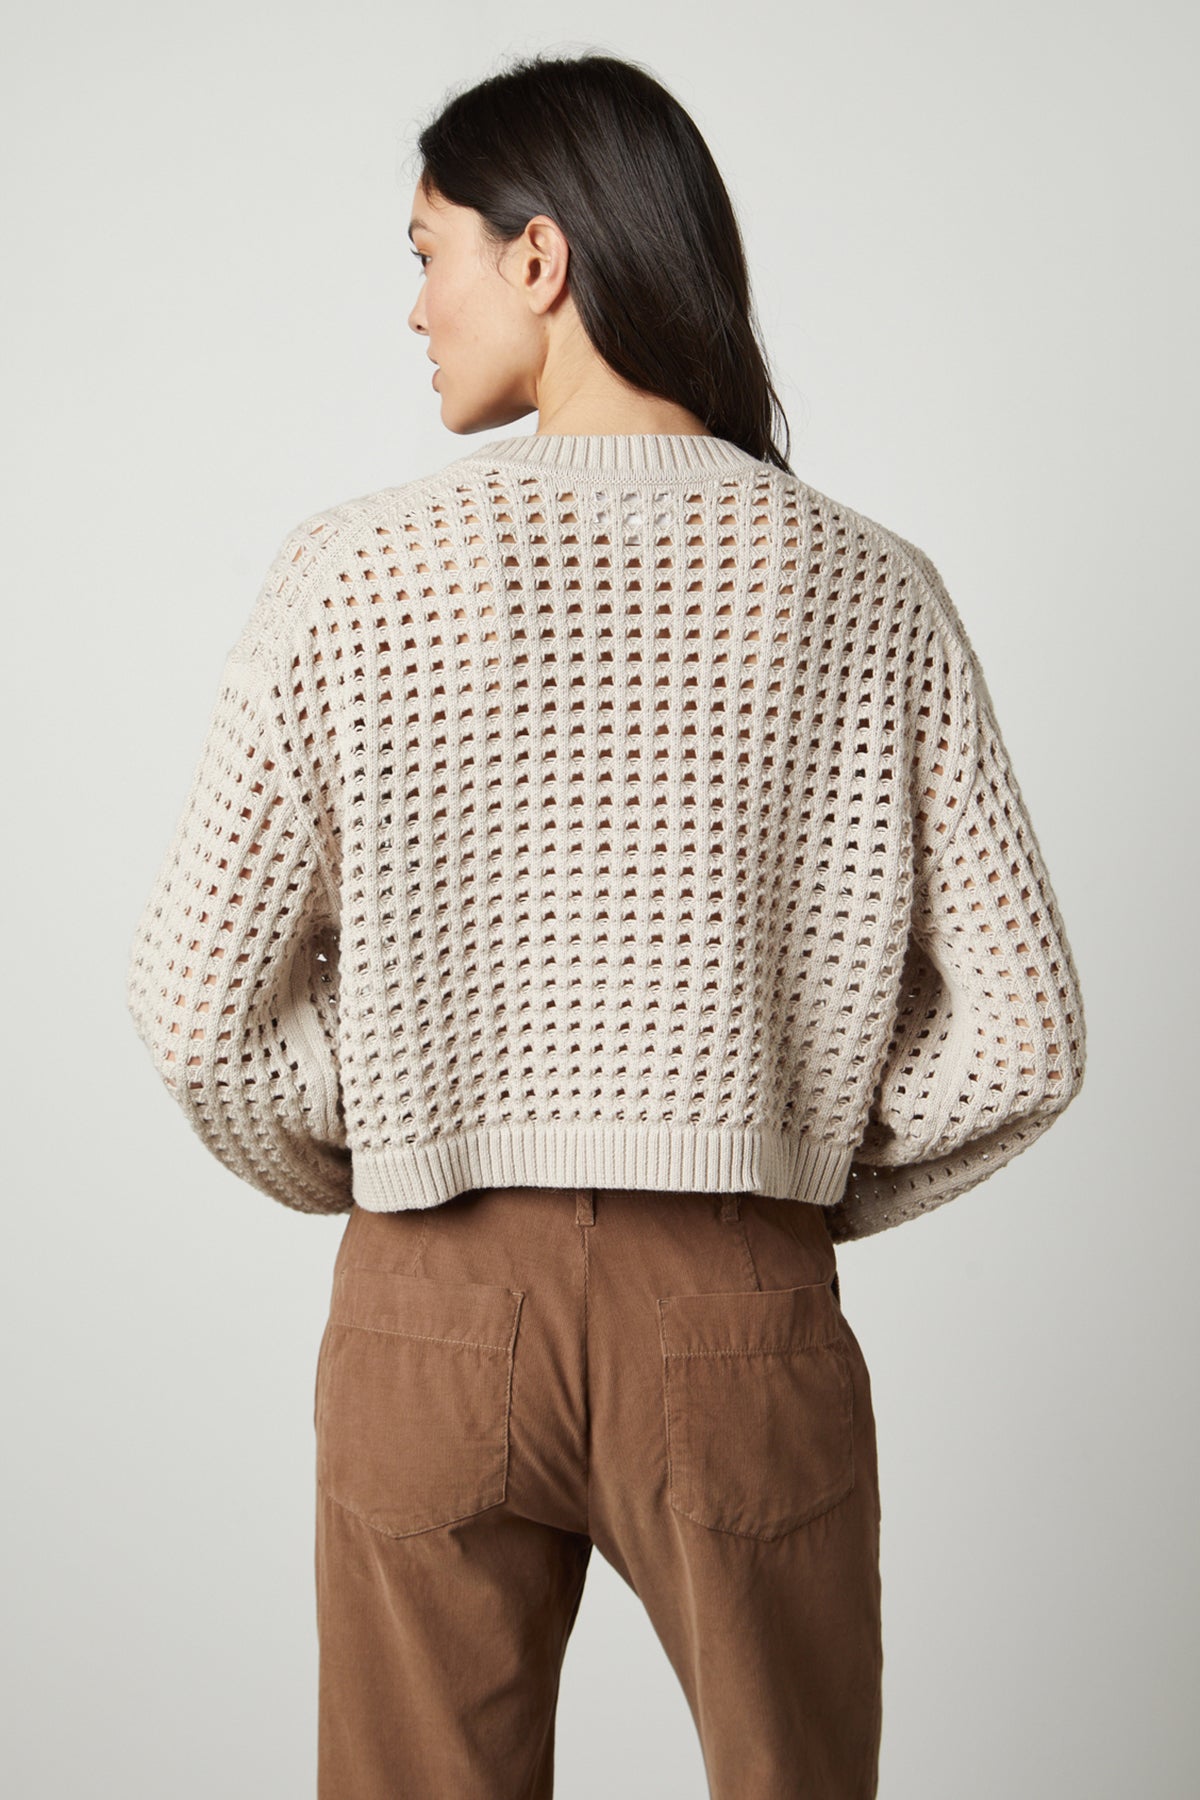 The back view of a woman wearing a Velvet by Graham & Spencer SAMMIE MESH KNIT CREW NECK SWEATER and brown pants.-26897858822337